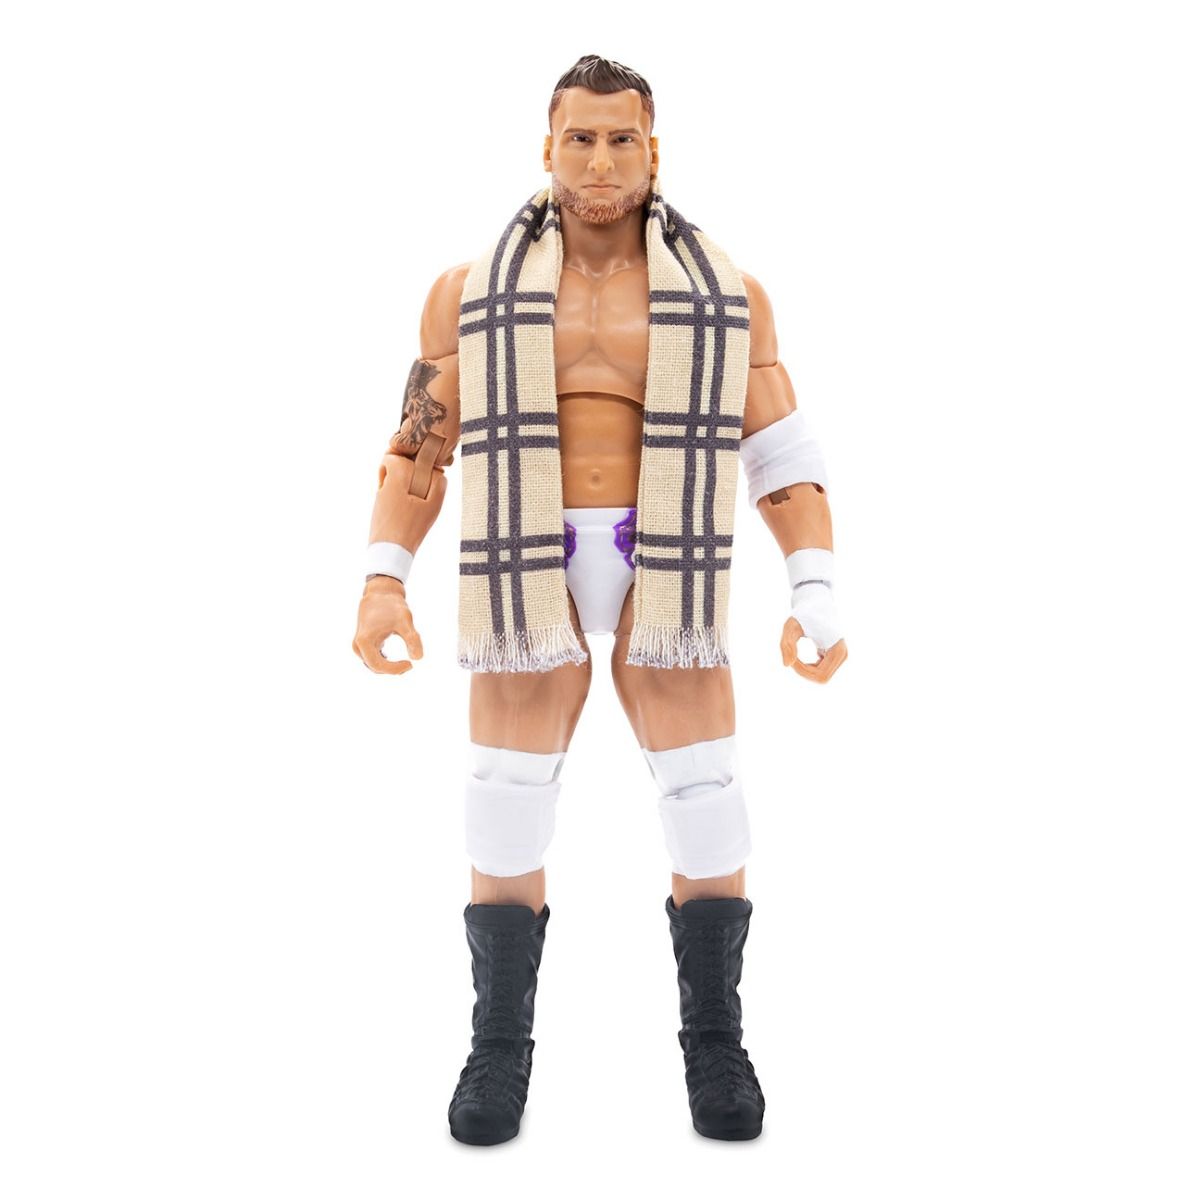 2022 AEW Jazwares Unmatched Collection Series 4 #29 MJF